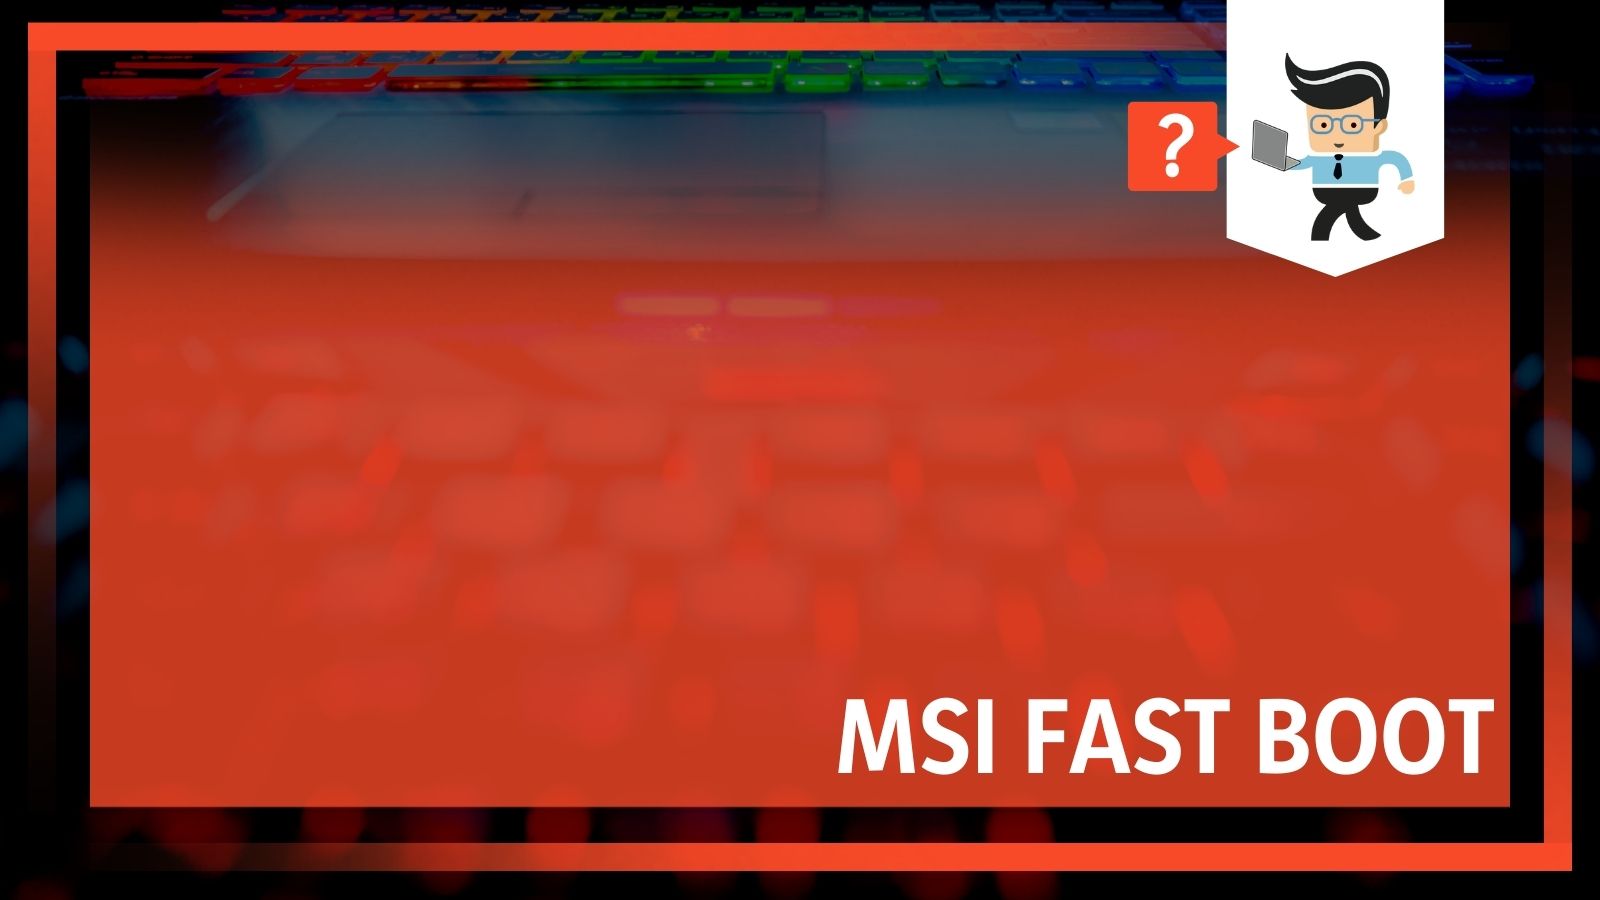 What is Msi Fast Boot Explanation